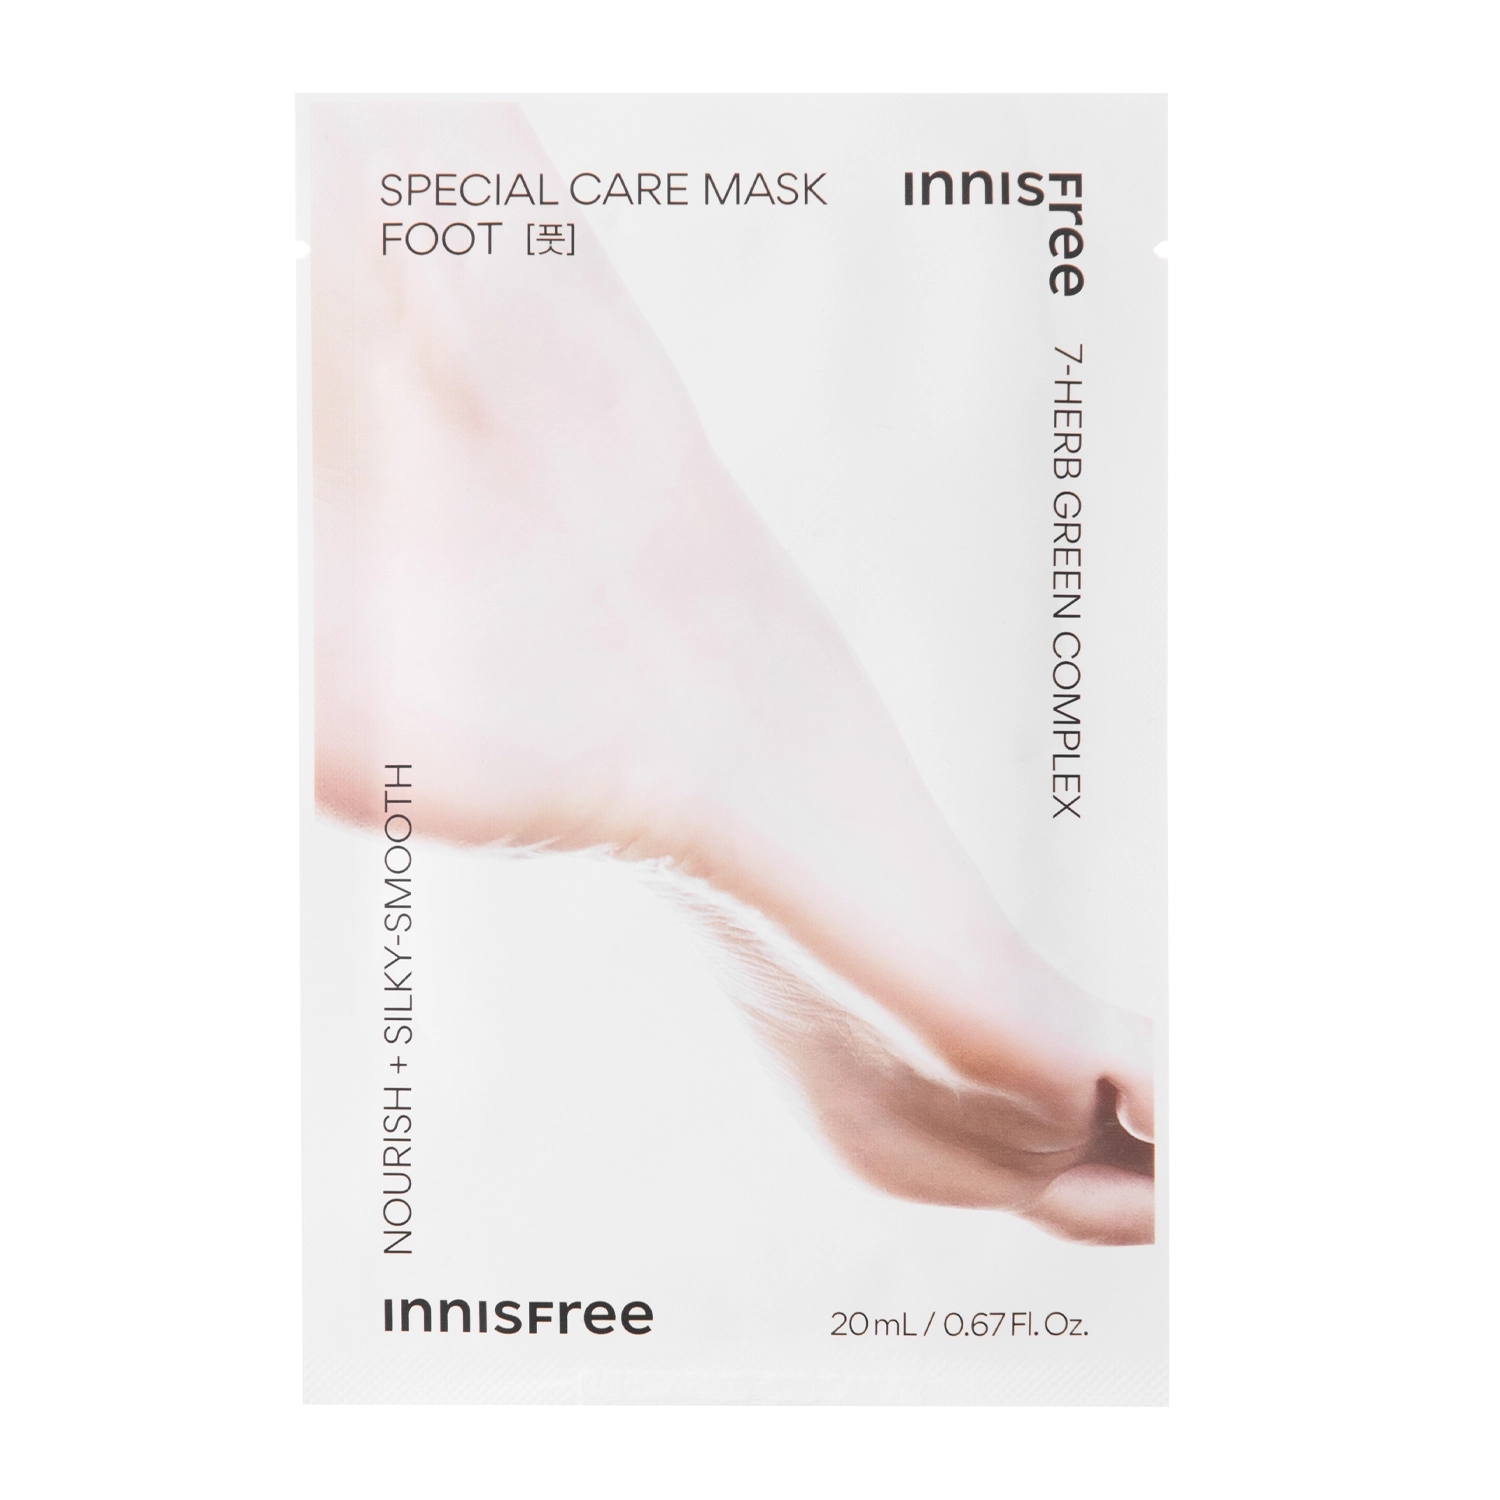 Innisfree - Special Care Foot Mask - 20ml